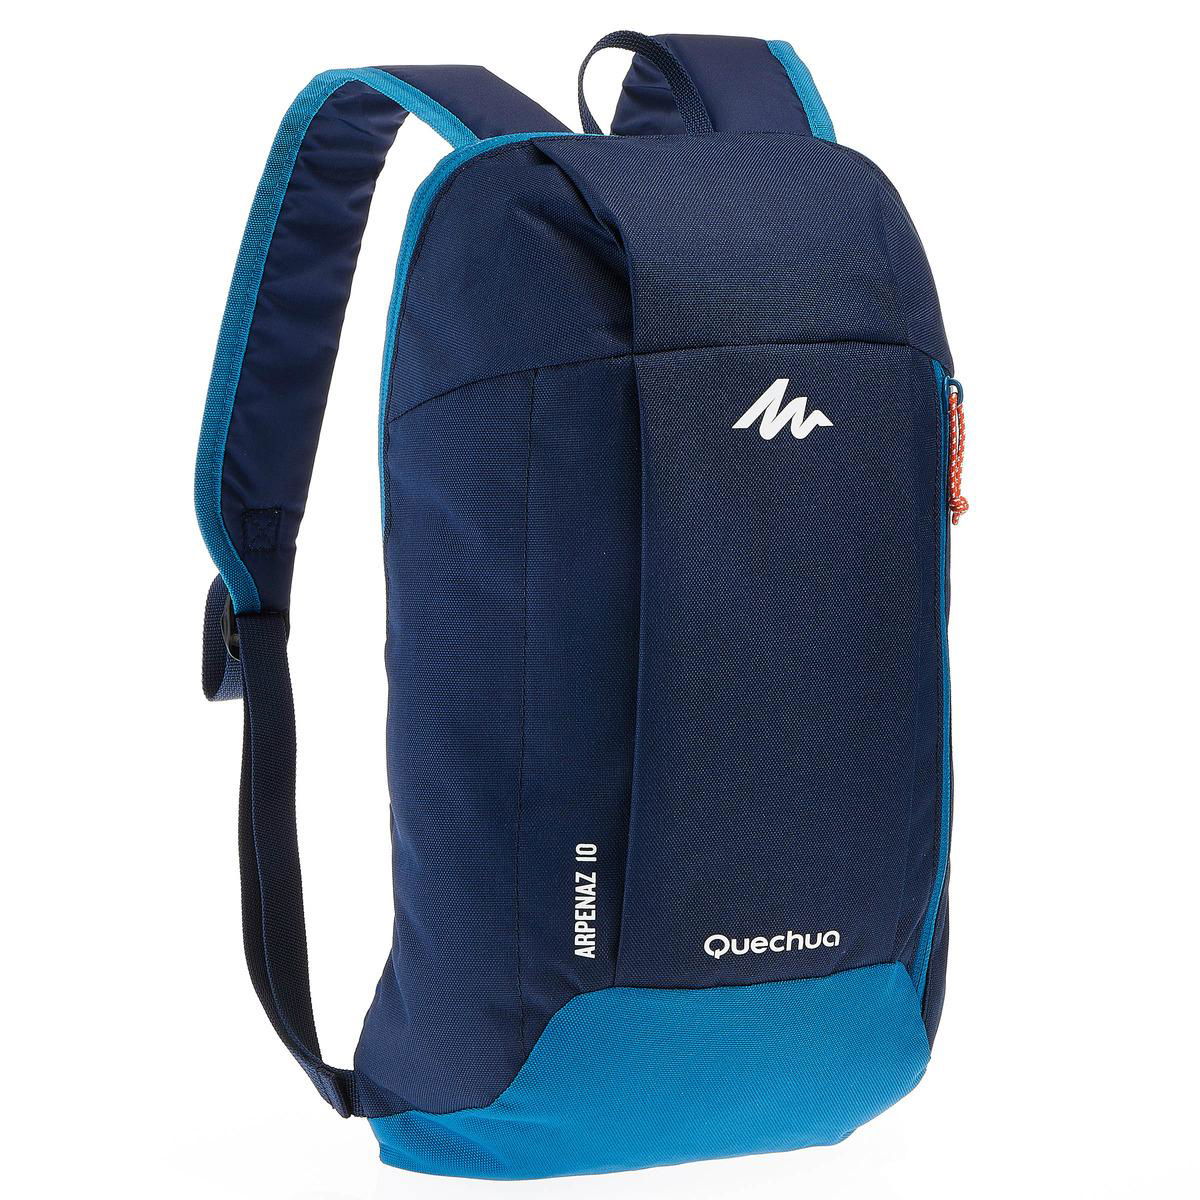 Outdoors sports easy to carry casual 10L backpack